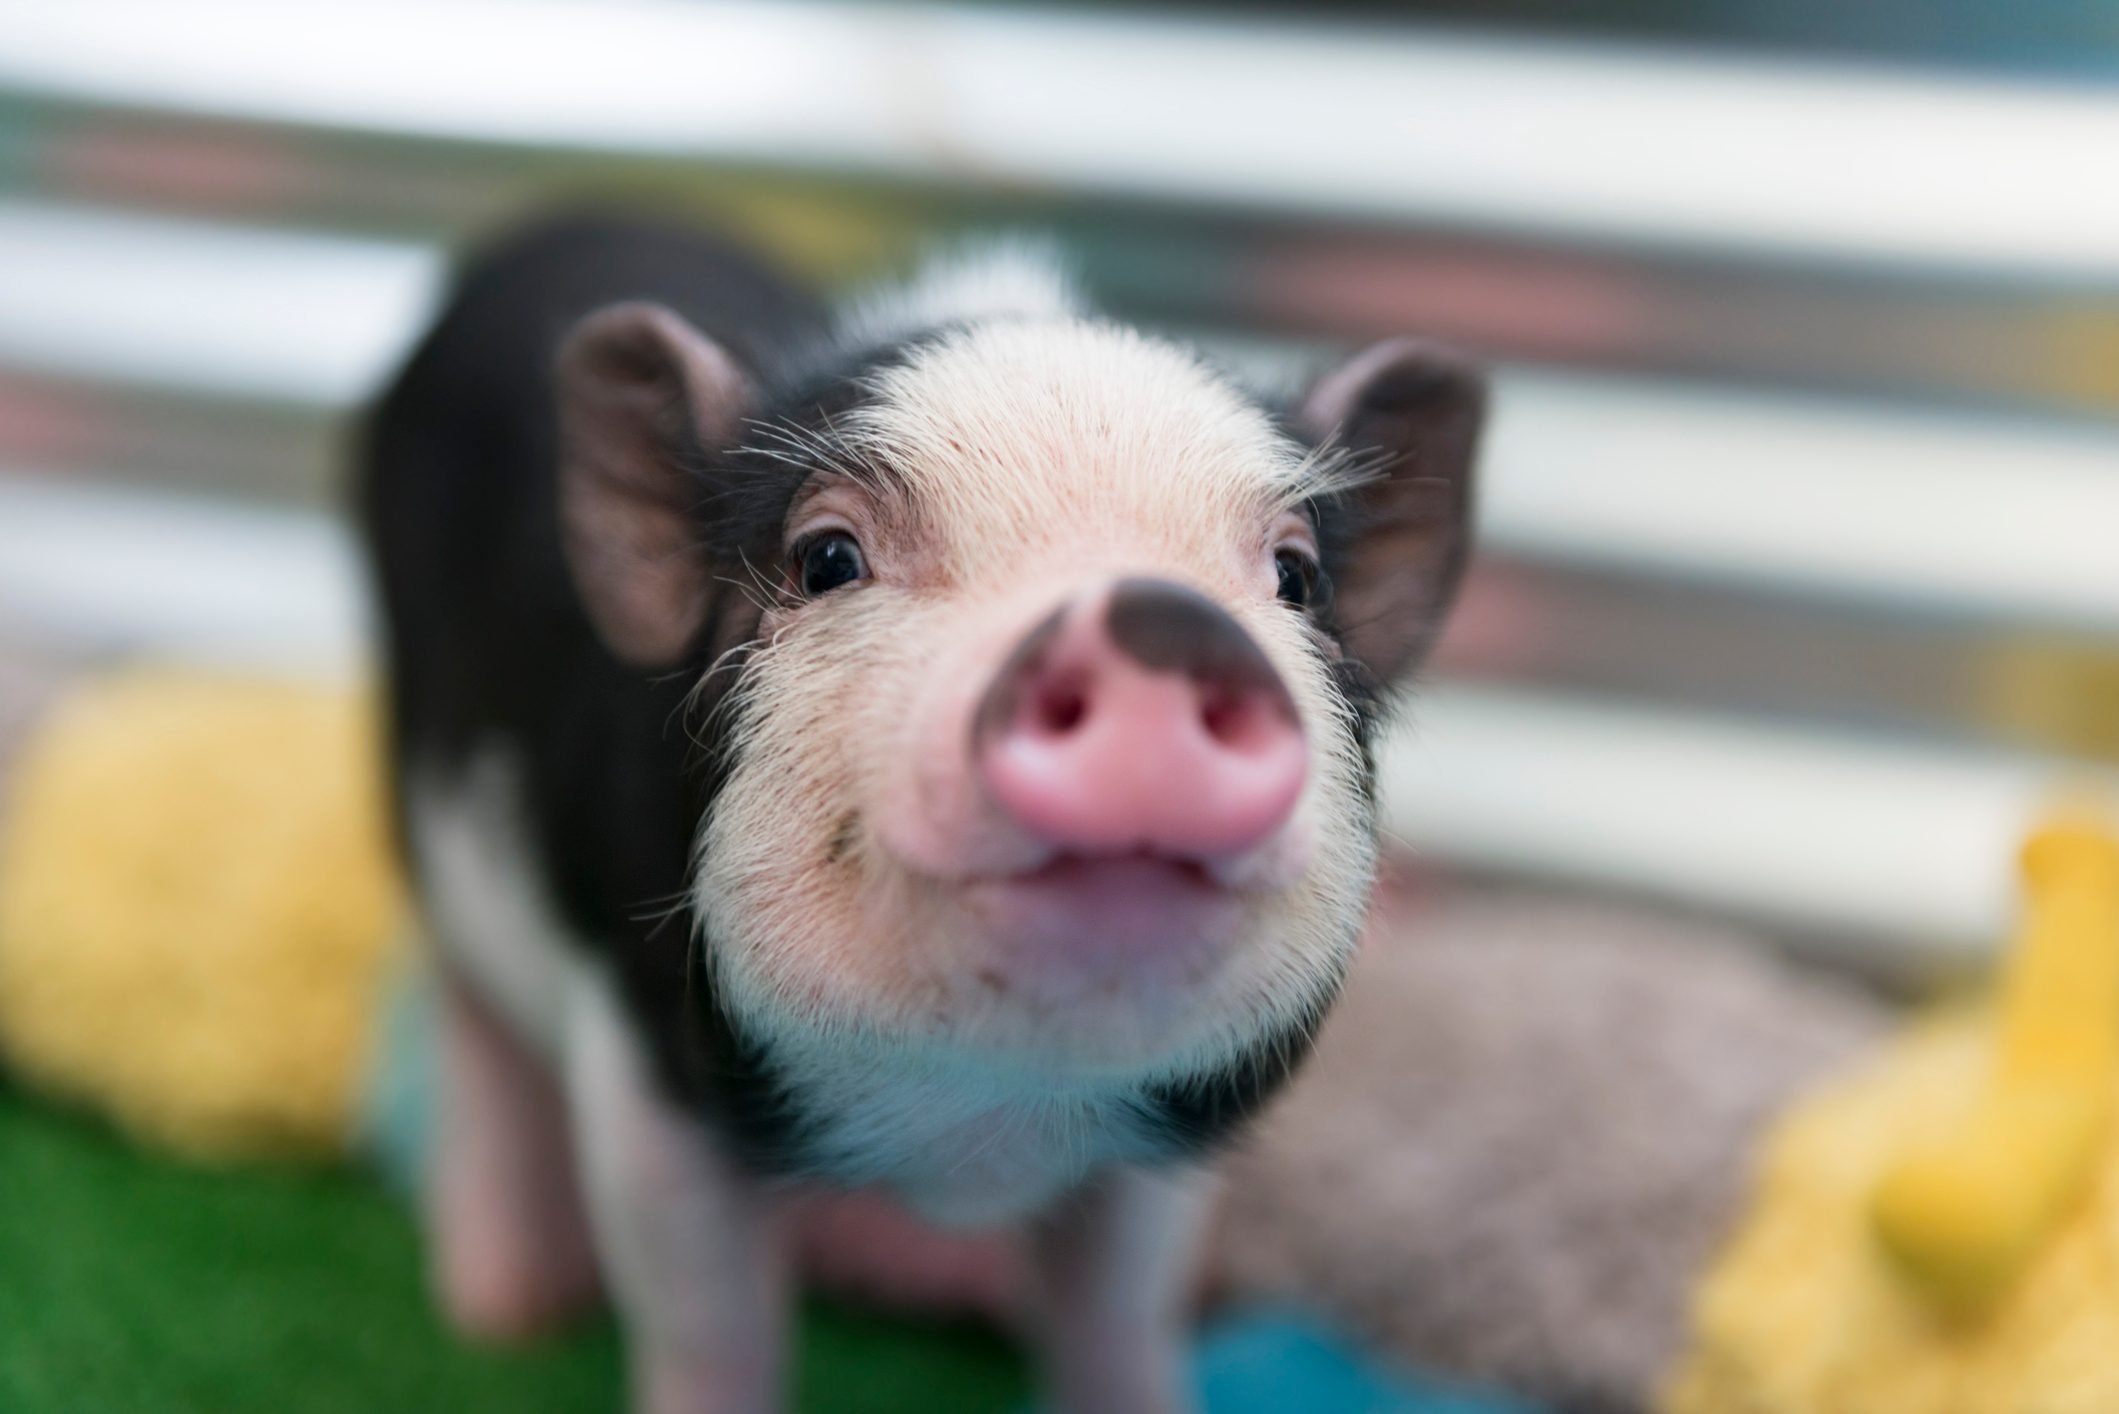 Stam terugbetaling zomer 40 Adorable Pig Pictures to Make You Smile | Reader's Digest